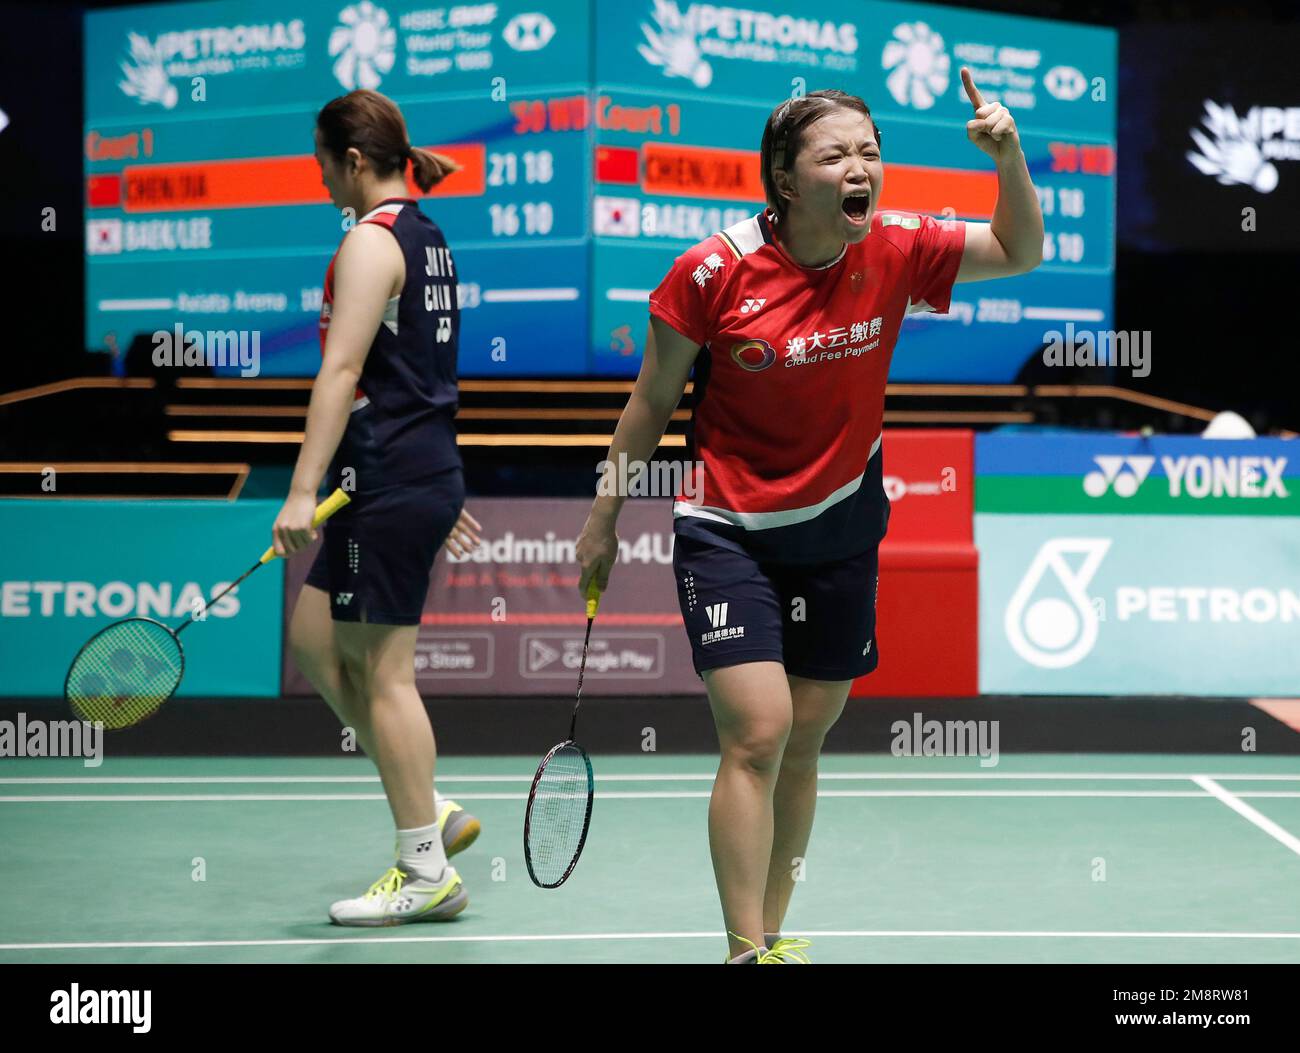 Kuala Lumpur, Malaysia. 15th Jan, 2023. Chen Qing Chen (L) and Jia Yi Fan of China react as they play against Baek Ha Na and Lee Yu Lim of Korea during the Women Doubles Finals match of the Petronas Malaysia Open 2023 at Axiata Arena.Chen Qing Chen and Jia Yi Fan of China won with scores; 21/21 : 16/10 (Photo by Wong Fok Loy/SOPA Images/Sipa USA) Credit: Sipa USA/Alamy Live News Stock Photo